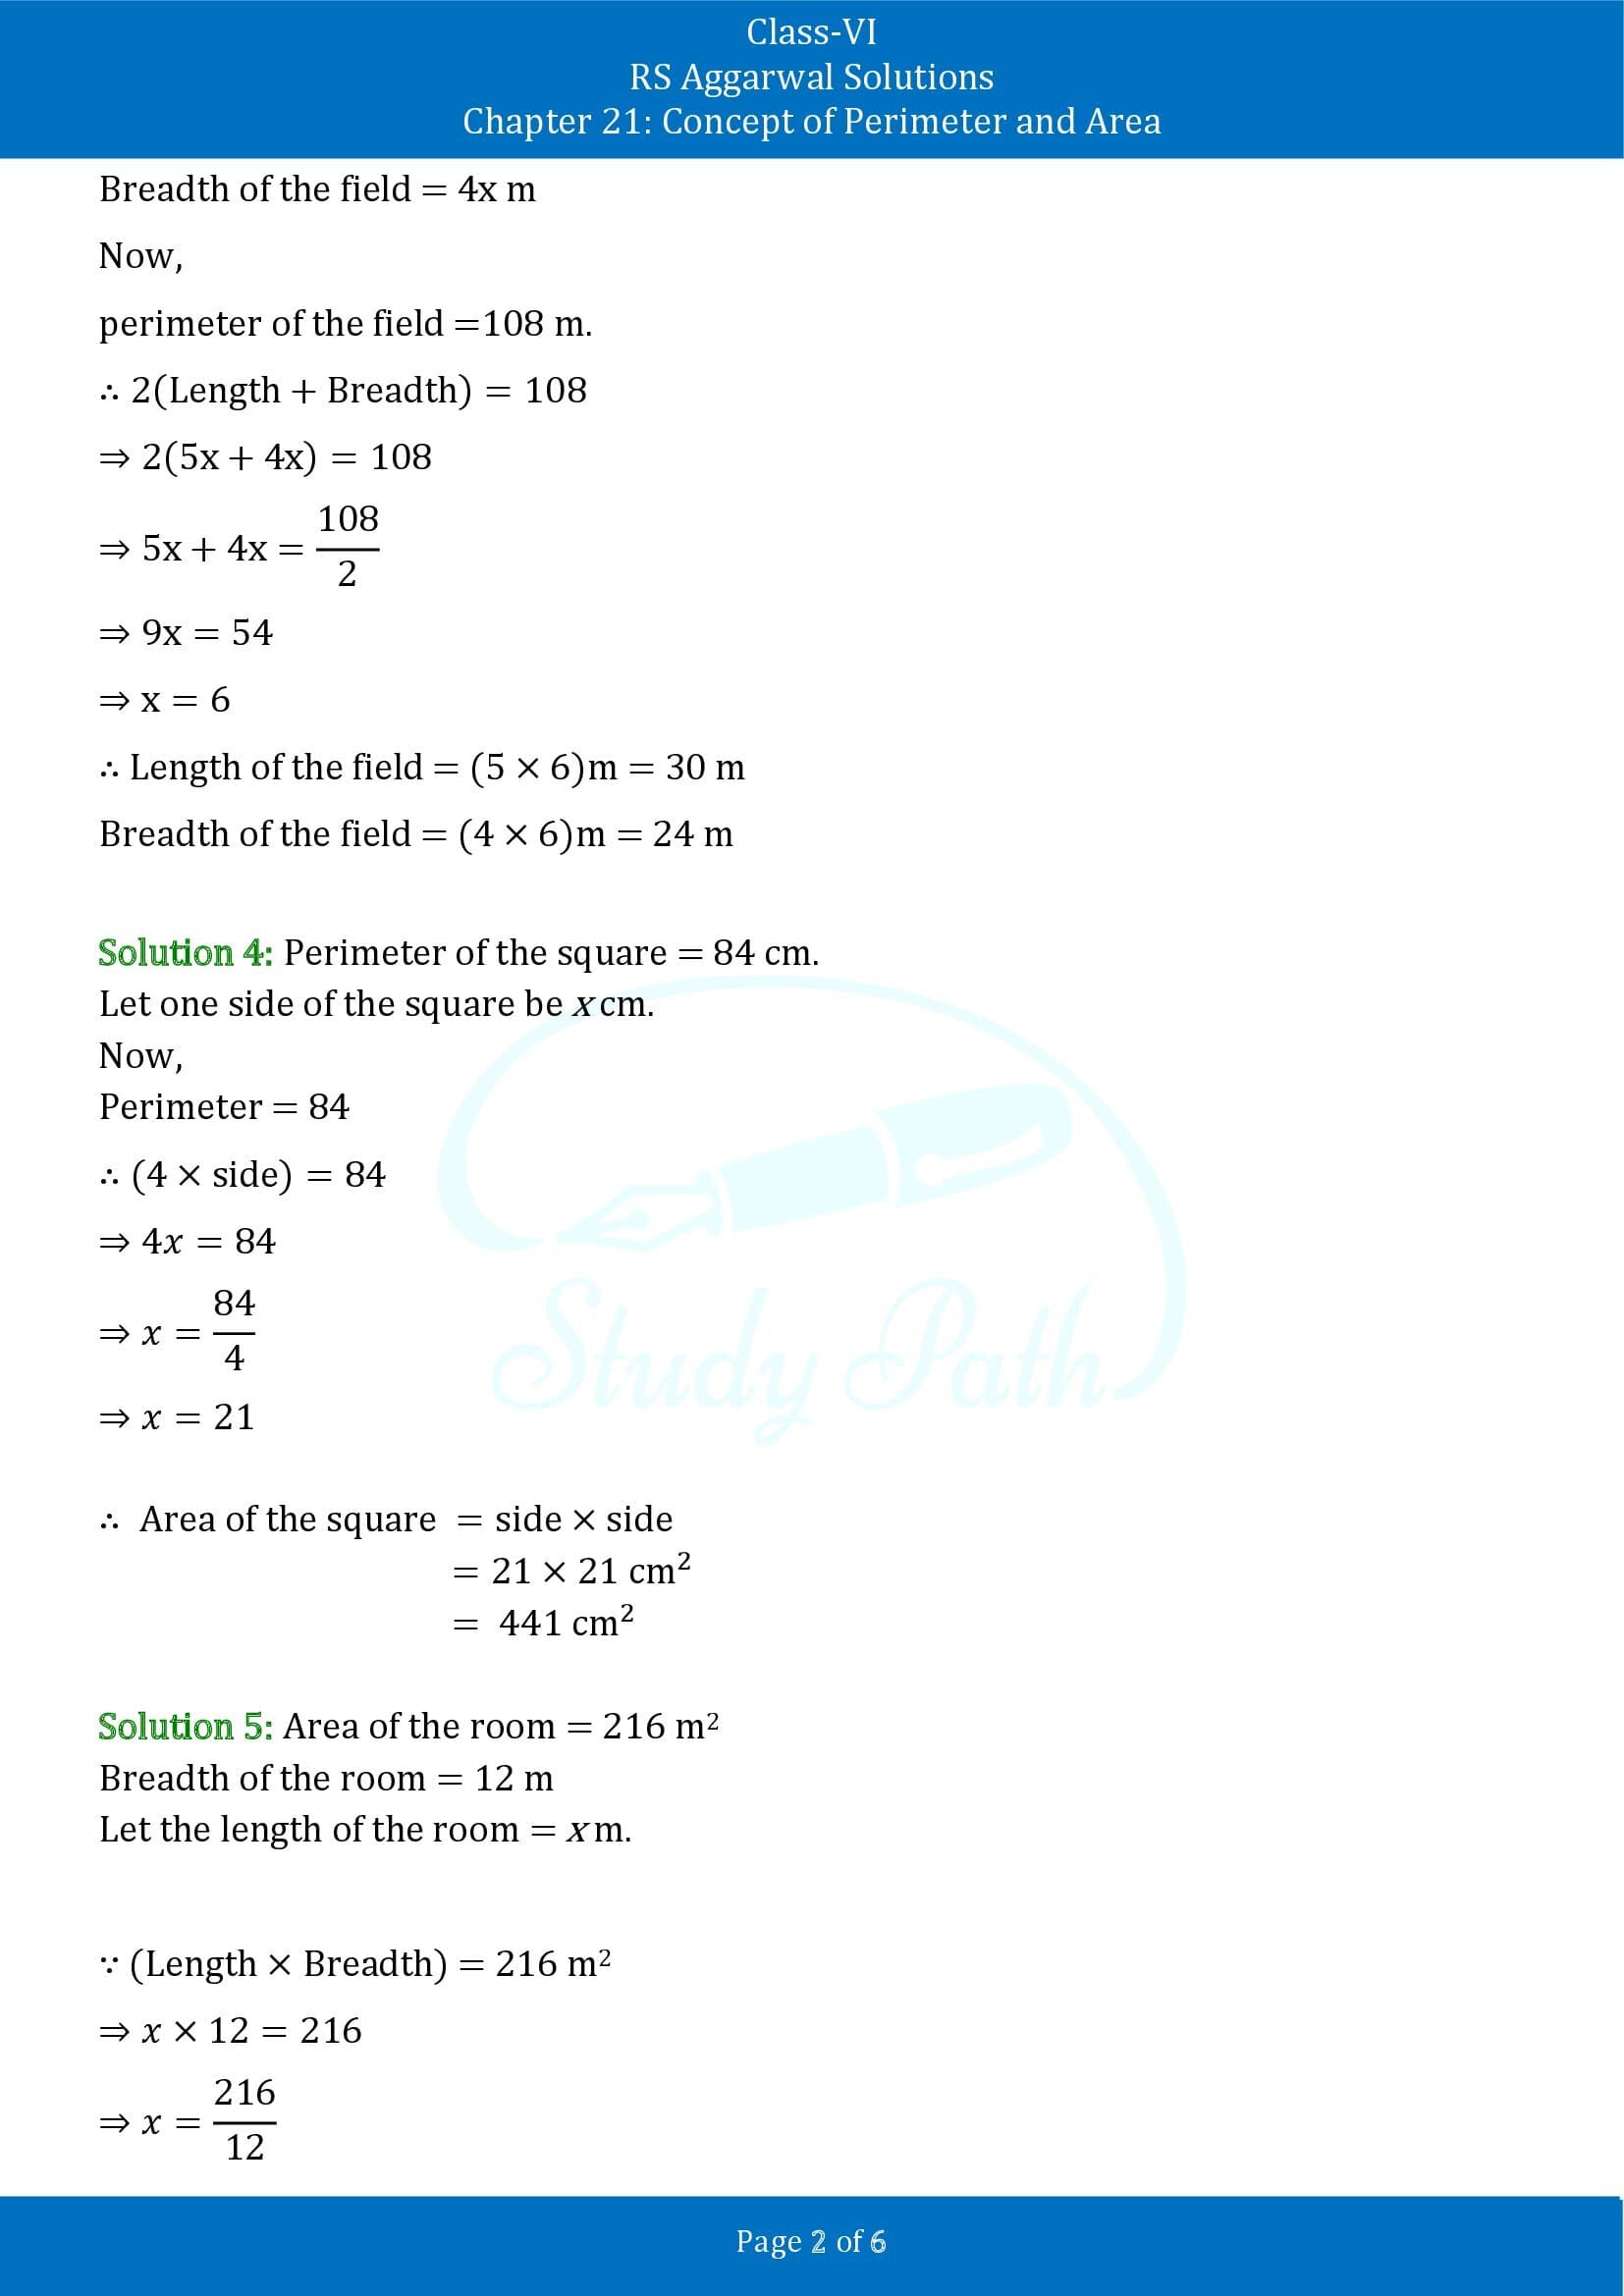 RS Aggarwal Solutions Class 6 Chapter 21 Concept of Perimeter and Area Test Paper 00002